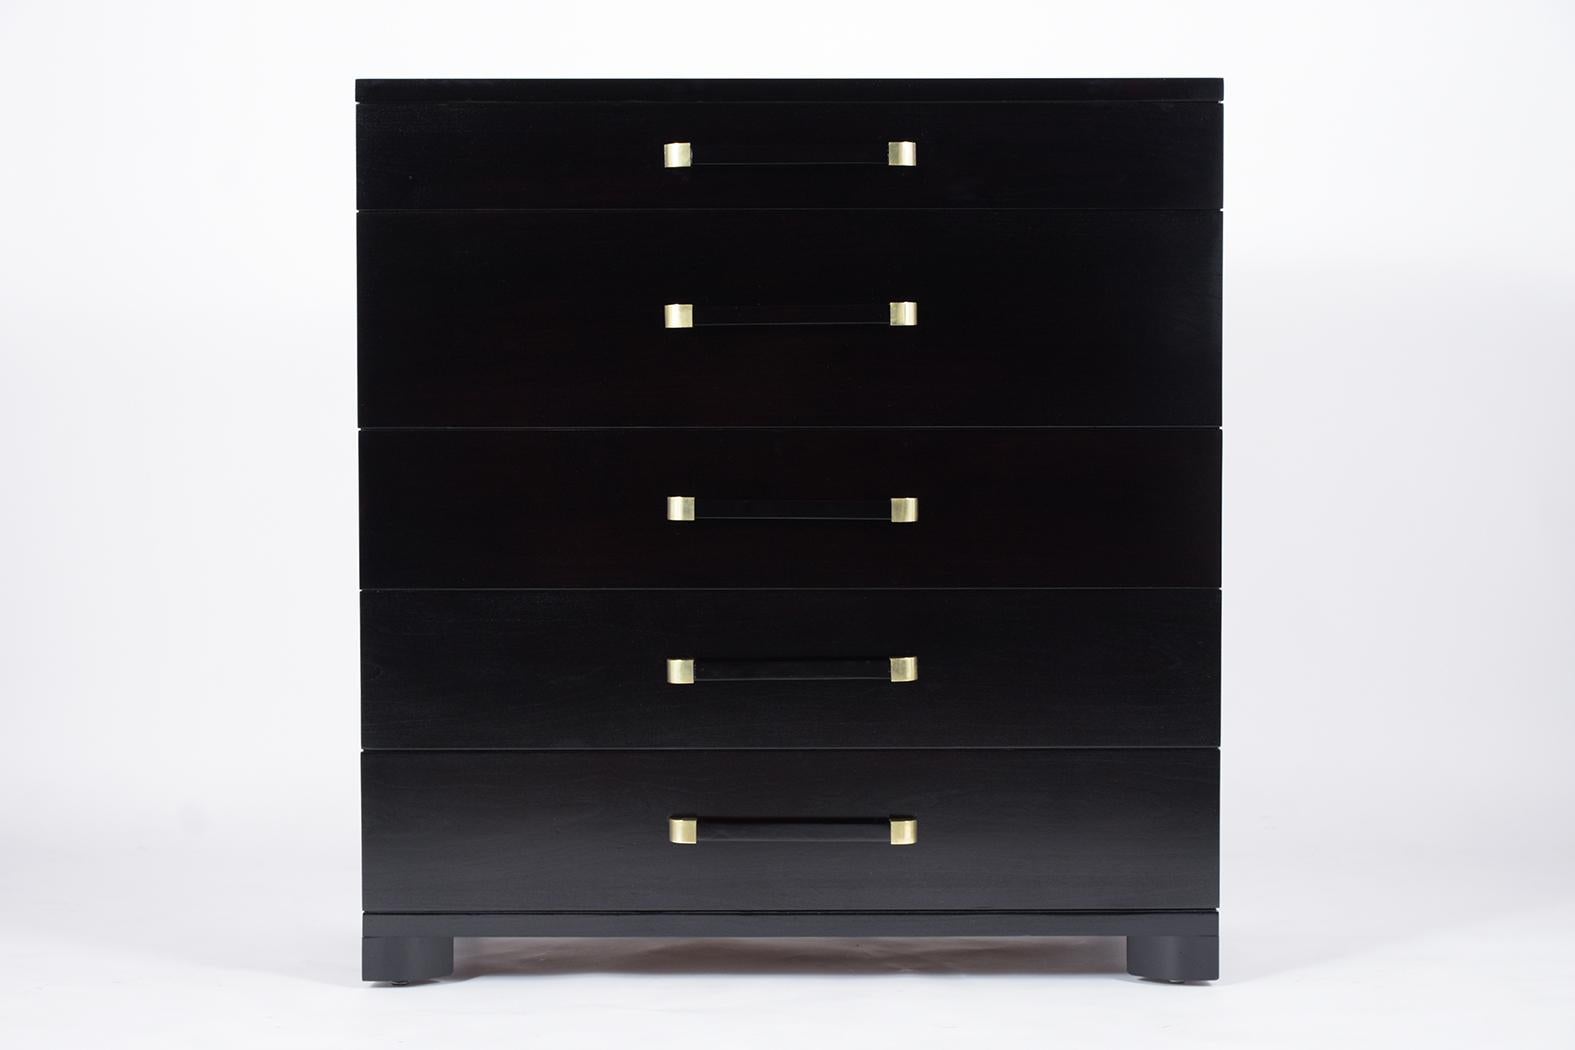 This Mid-Century Modern dresser for John Widdicomb Company is made of walnut wood, has a sleek design, and incredible ebonized lacquered finish. The dresser features 5 vertical drawers that each come with a large center carved wood handle with brass